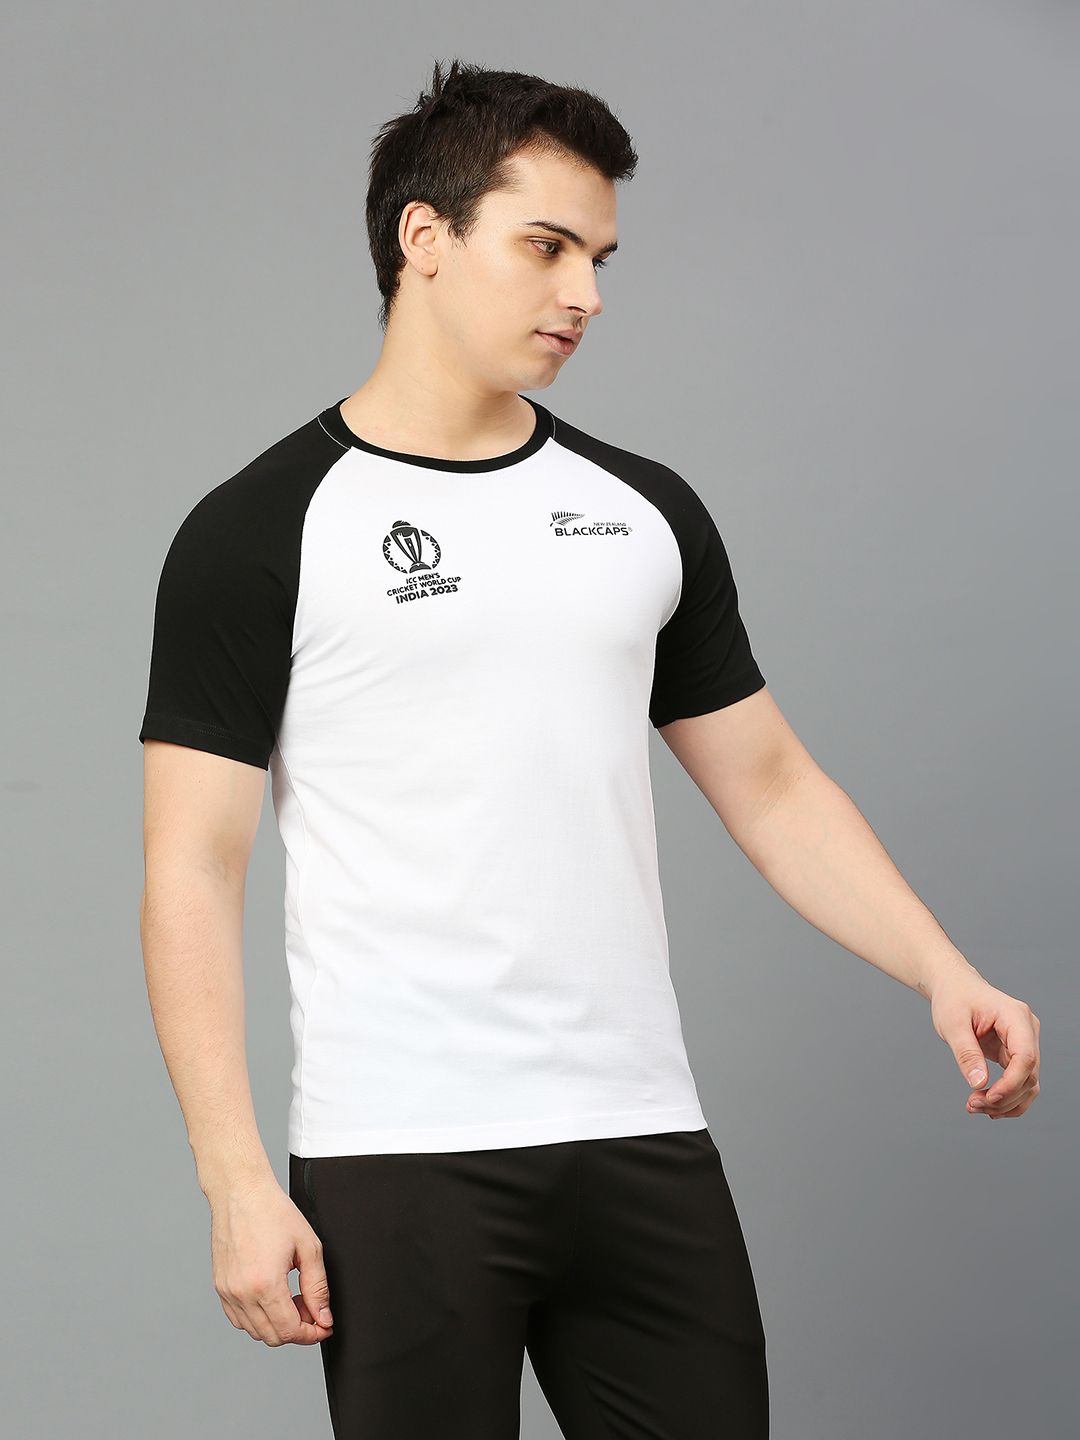 Buy Official ICC CWC-23 Men White and Black Colourblocked Short Sleeves ...